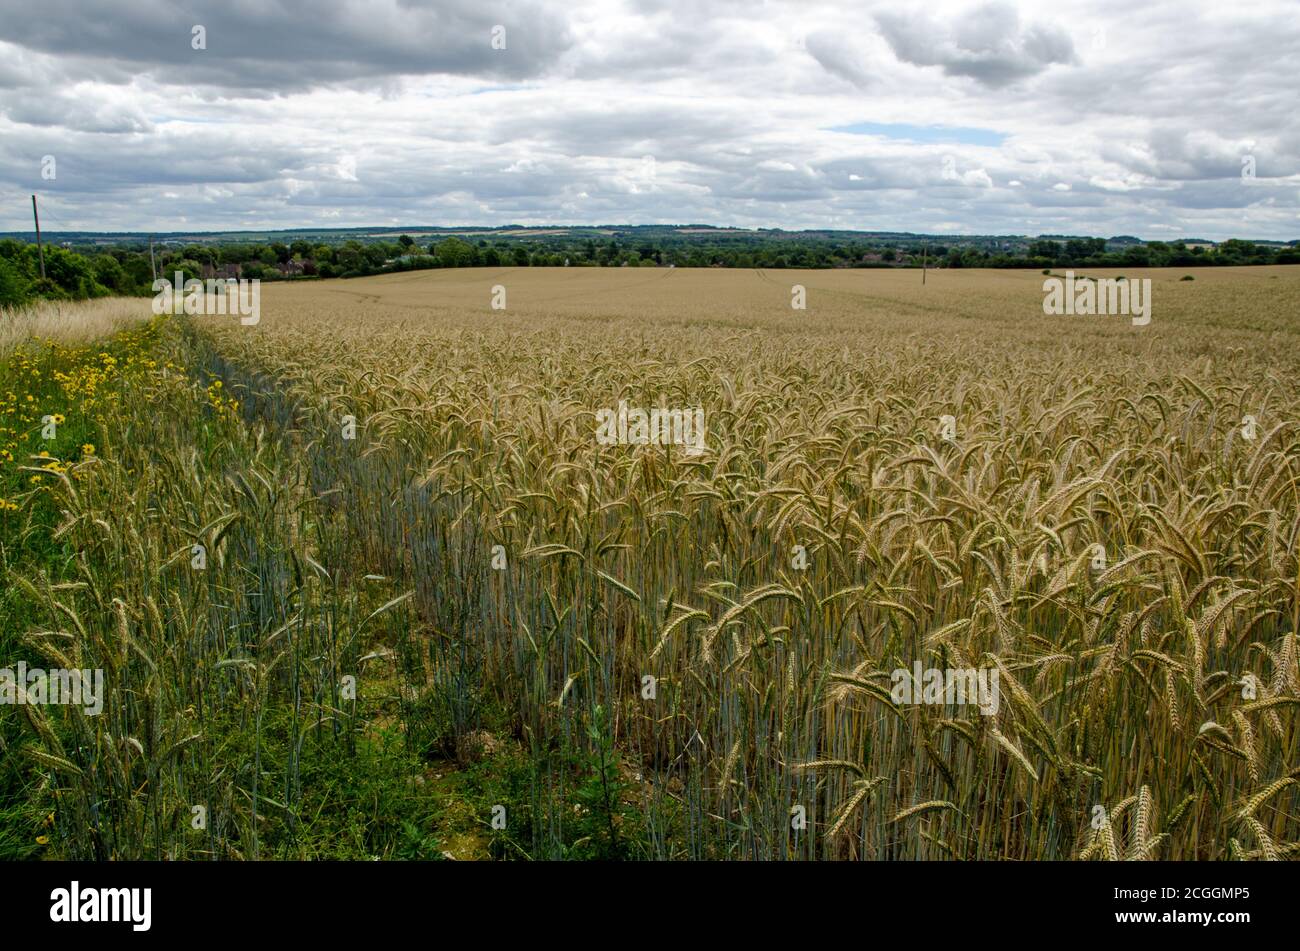 View across a field of ripening corn looking towards the Hampshire town of Basingstoke on a summer day.  The farmland - part of the Manydown Estate - Stock Photo